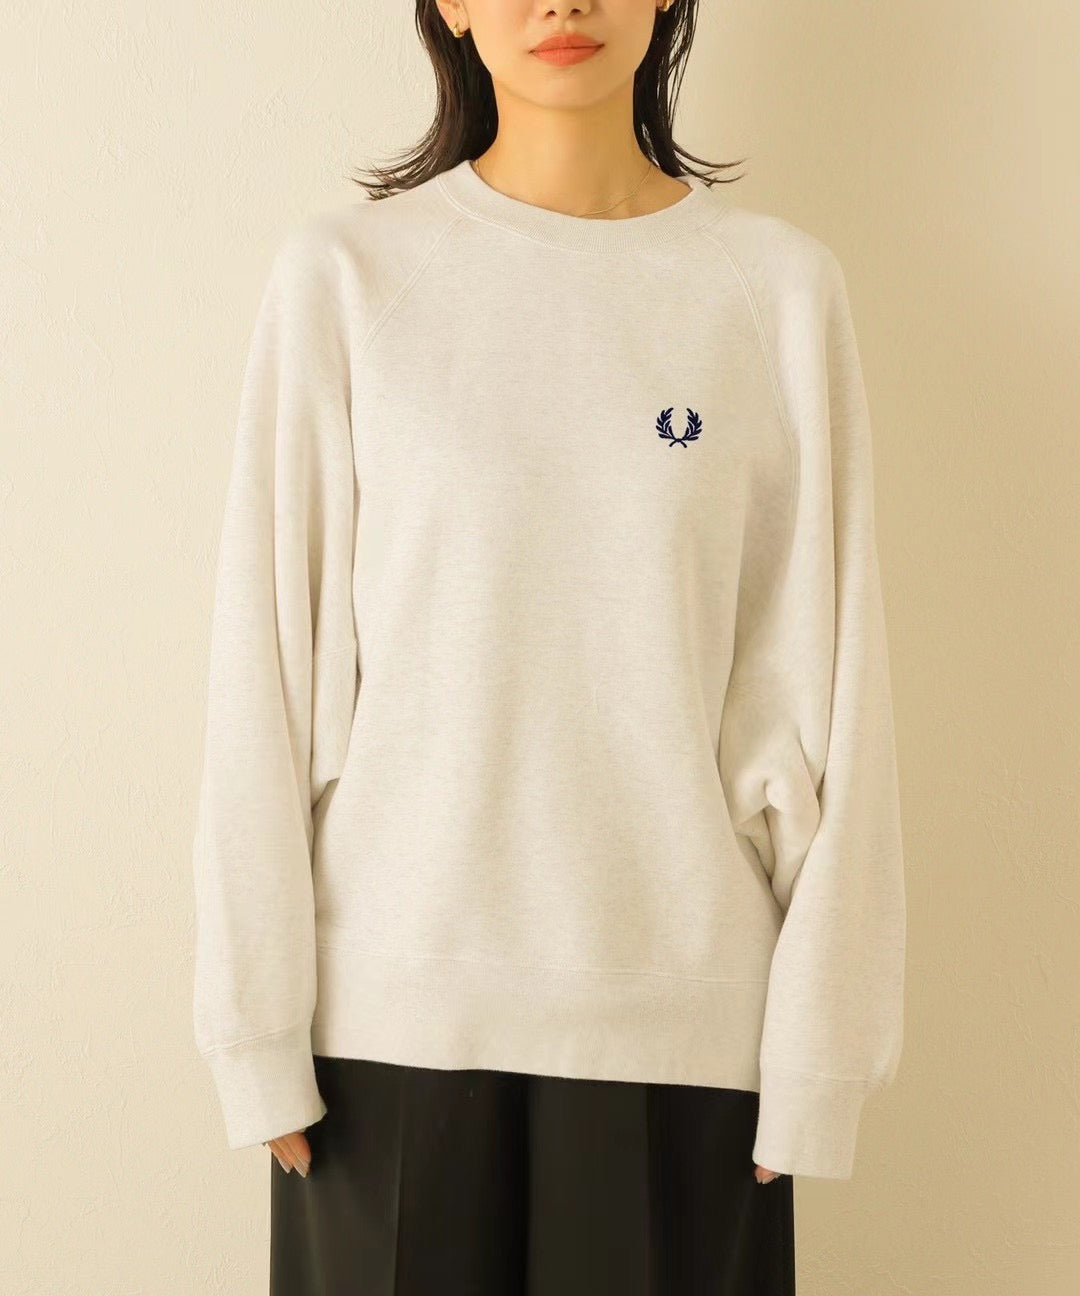 Fred perry logo衛衣